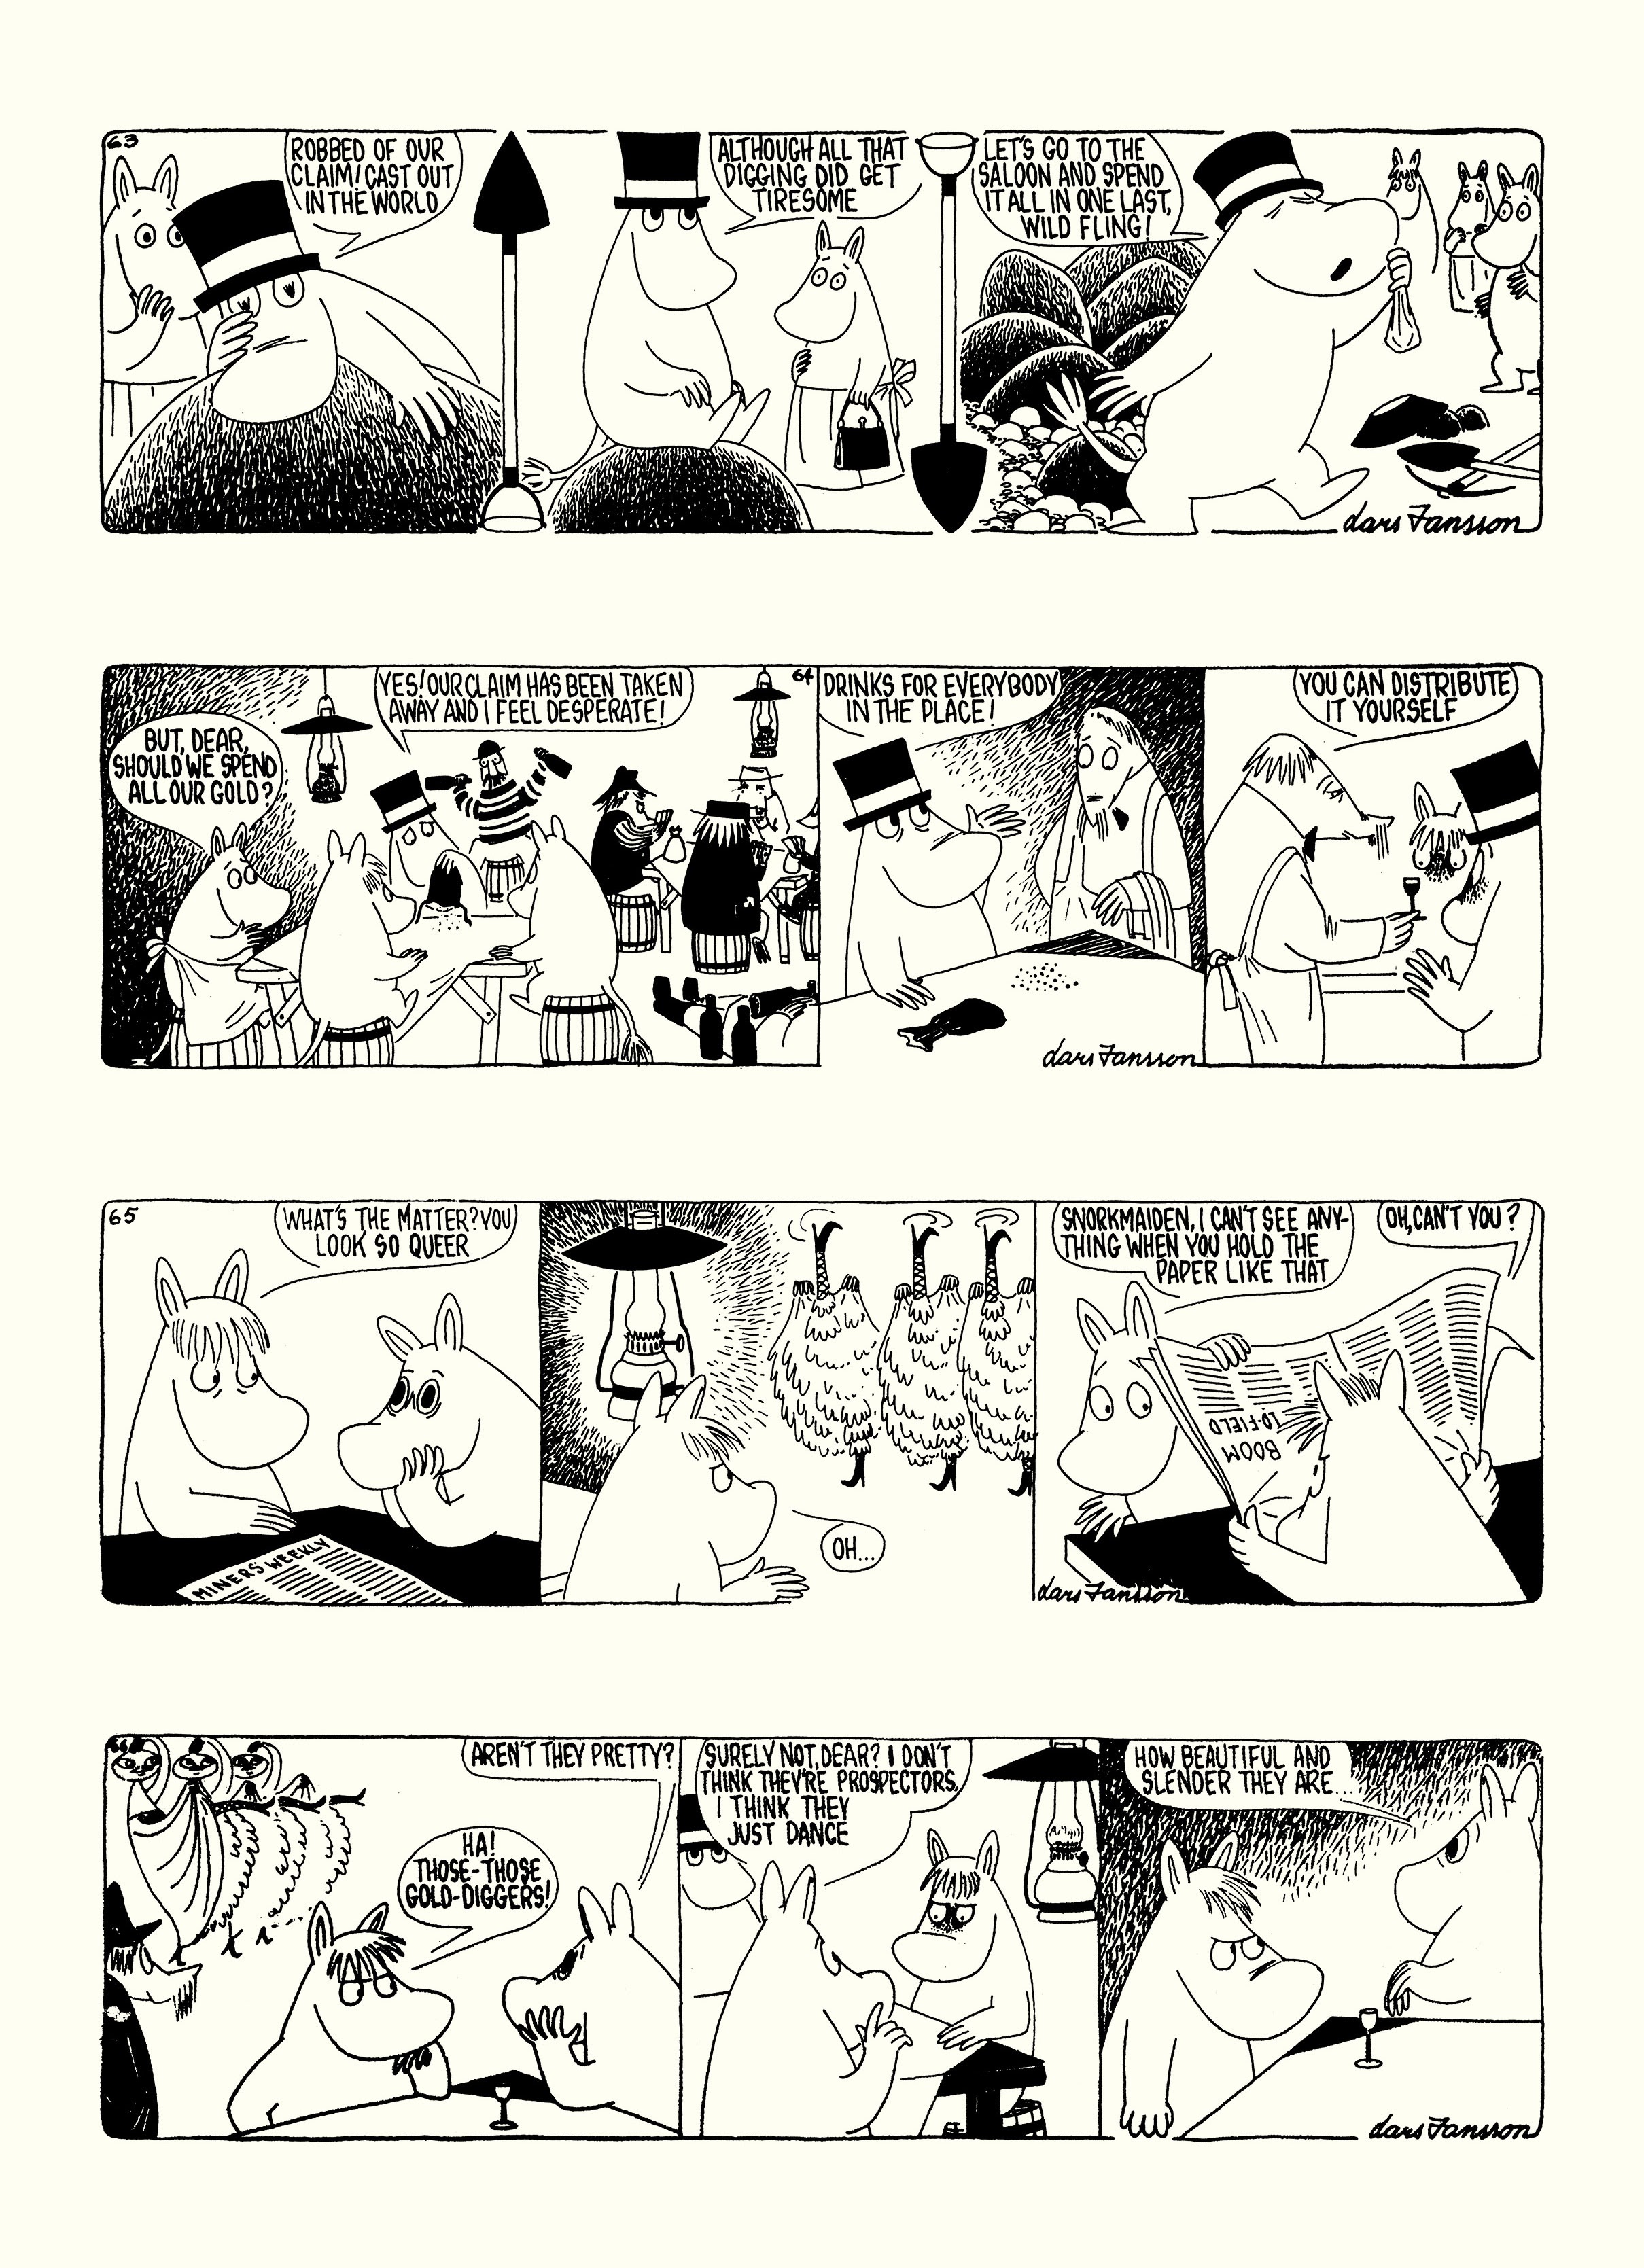 Read online Moomin: The Complete Lars Jansson Comic Strip comic -  Issue # TPB 7 - 85